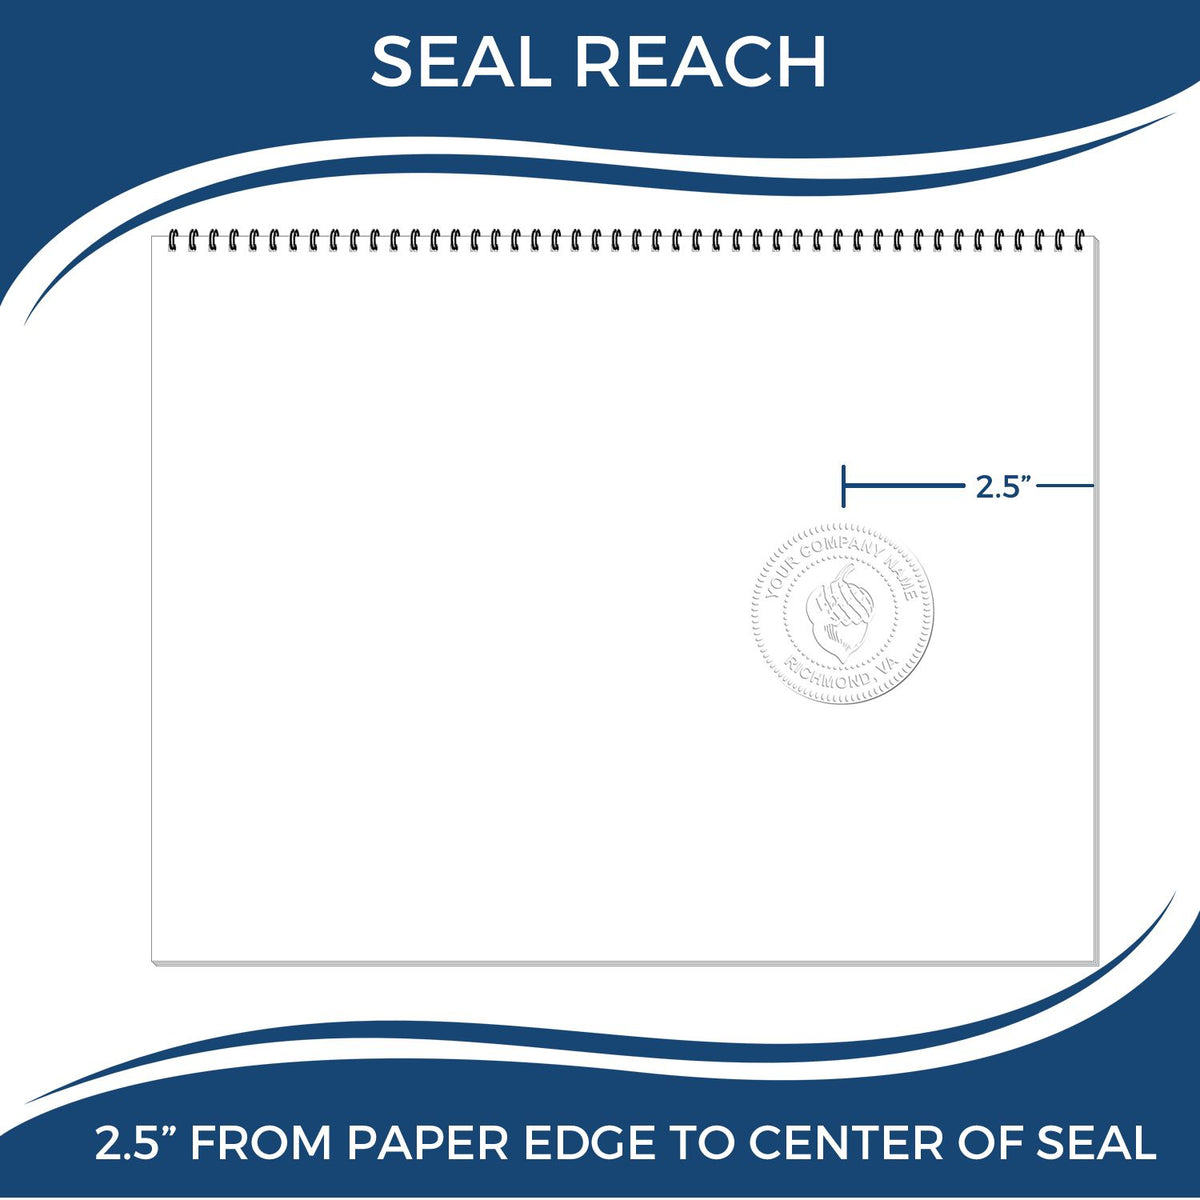 An infographic showing the seal reach which is represented by a ruler and a miniature seal image of the Heavy Duty Cast Iron Kansas Engineer Seal Embosser